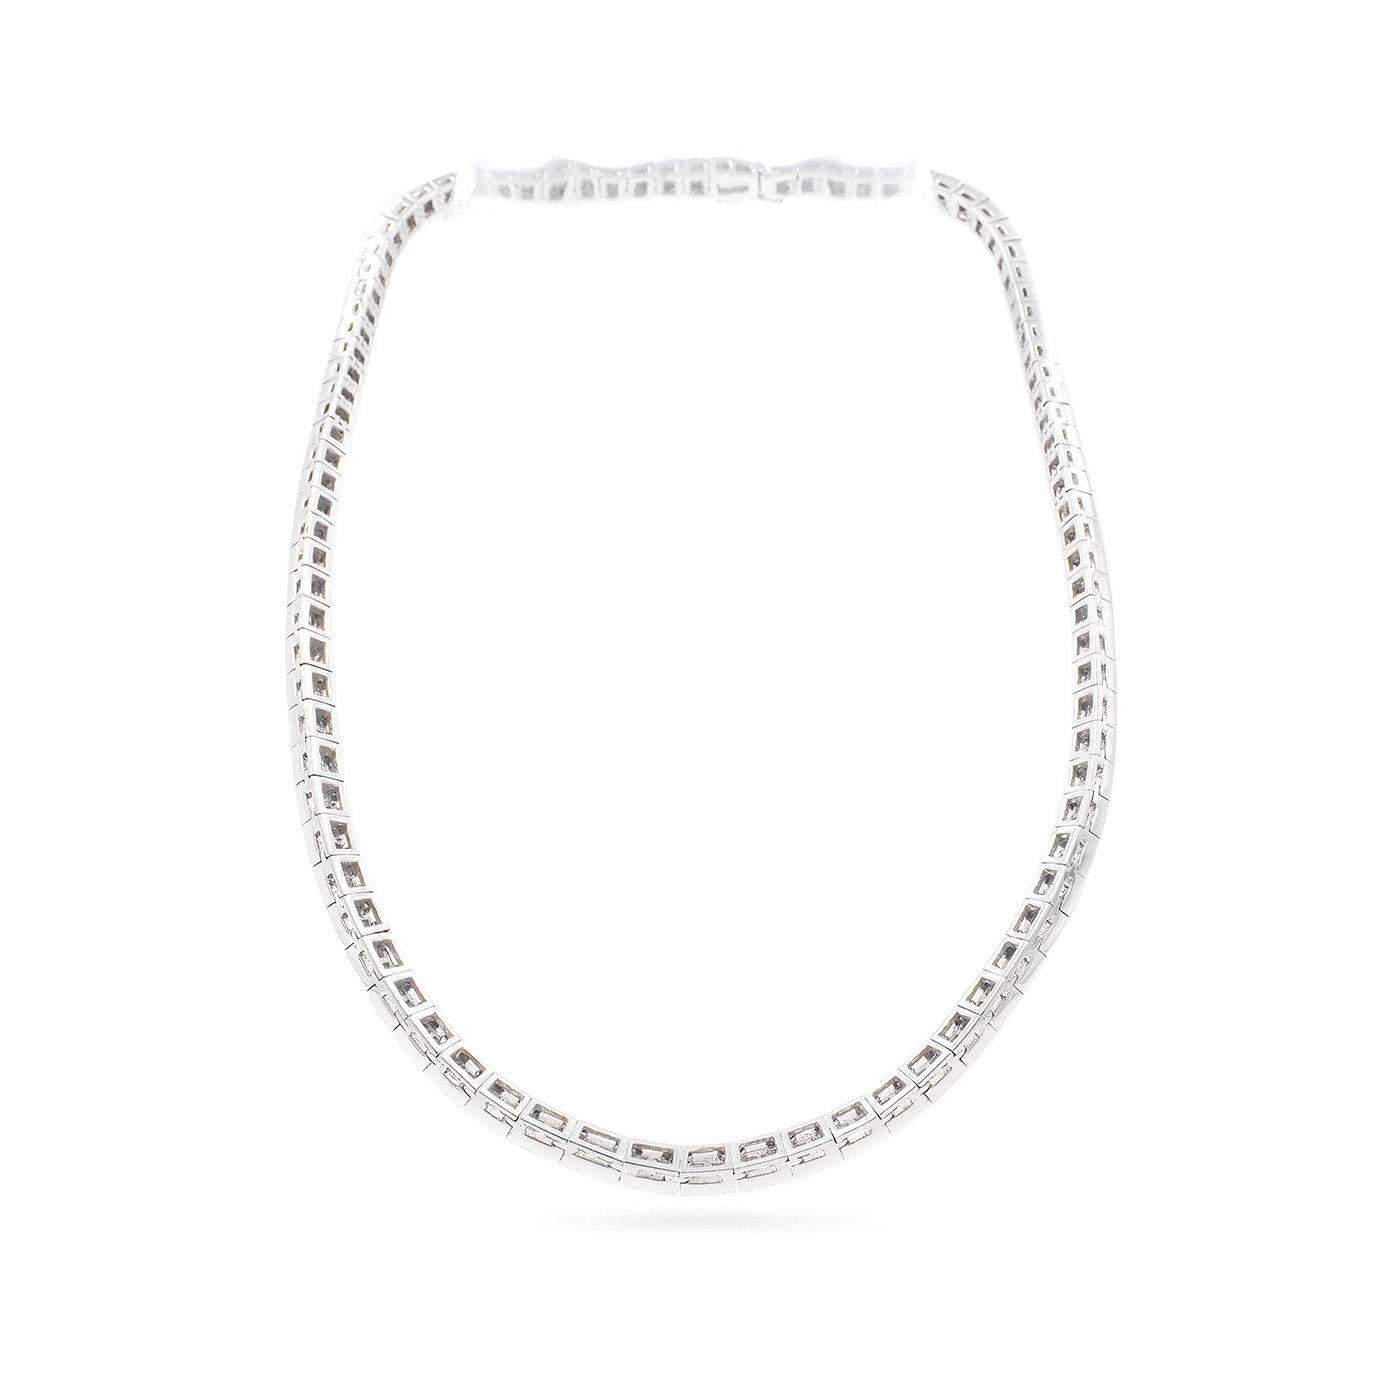 Vintage 10.38 Ctw. Baguette Cut Diamond Collar Necklace composed of platinum. With 10.38 carats of Baguette Cut diamonds, with colors ranging G-H-I and clarities ranging VS1-VS2. Diamonds are channel set in platinum links. Necklace weighs 78.9 grams